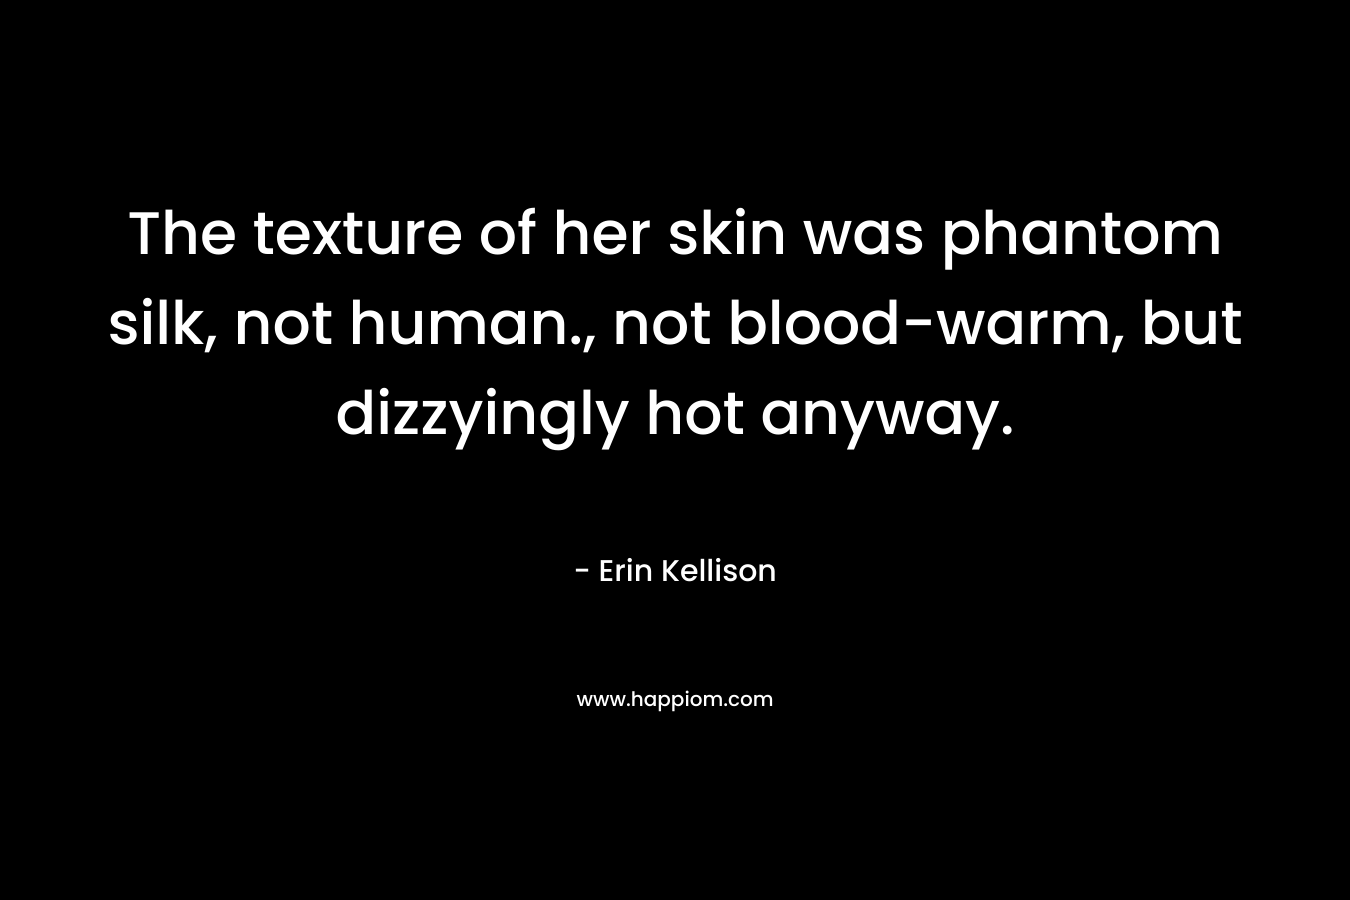 The texture of her skin was phantom silk, not human., not blood-warm, but dizzyingly hot anyway. – Erin Kellison